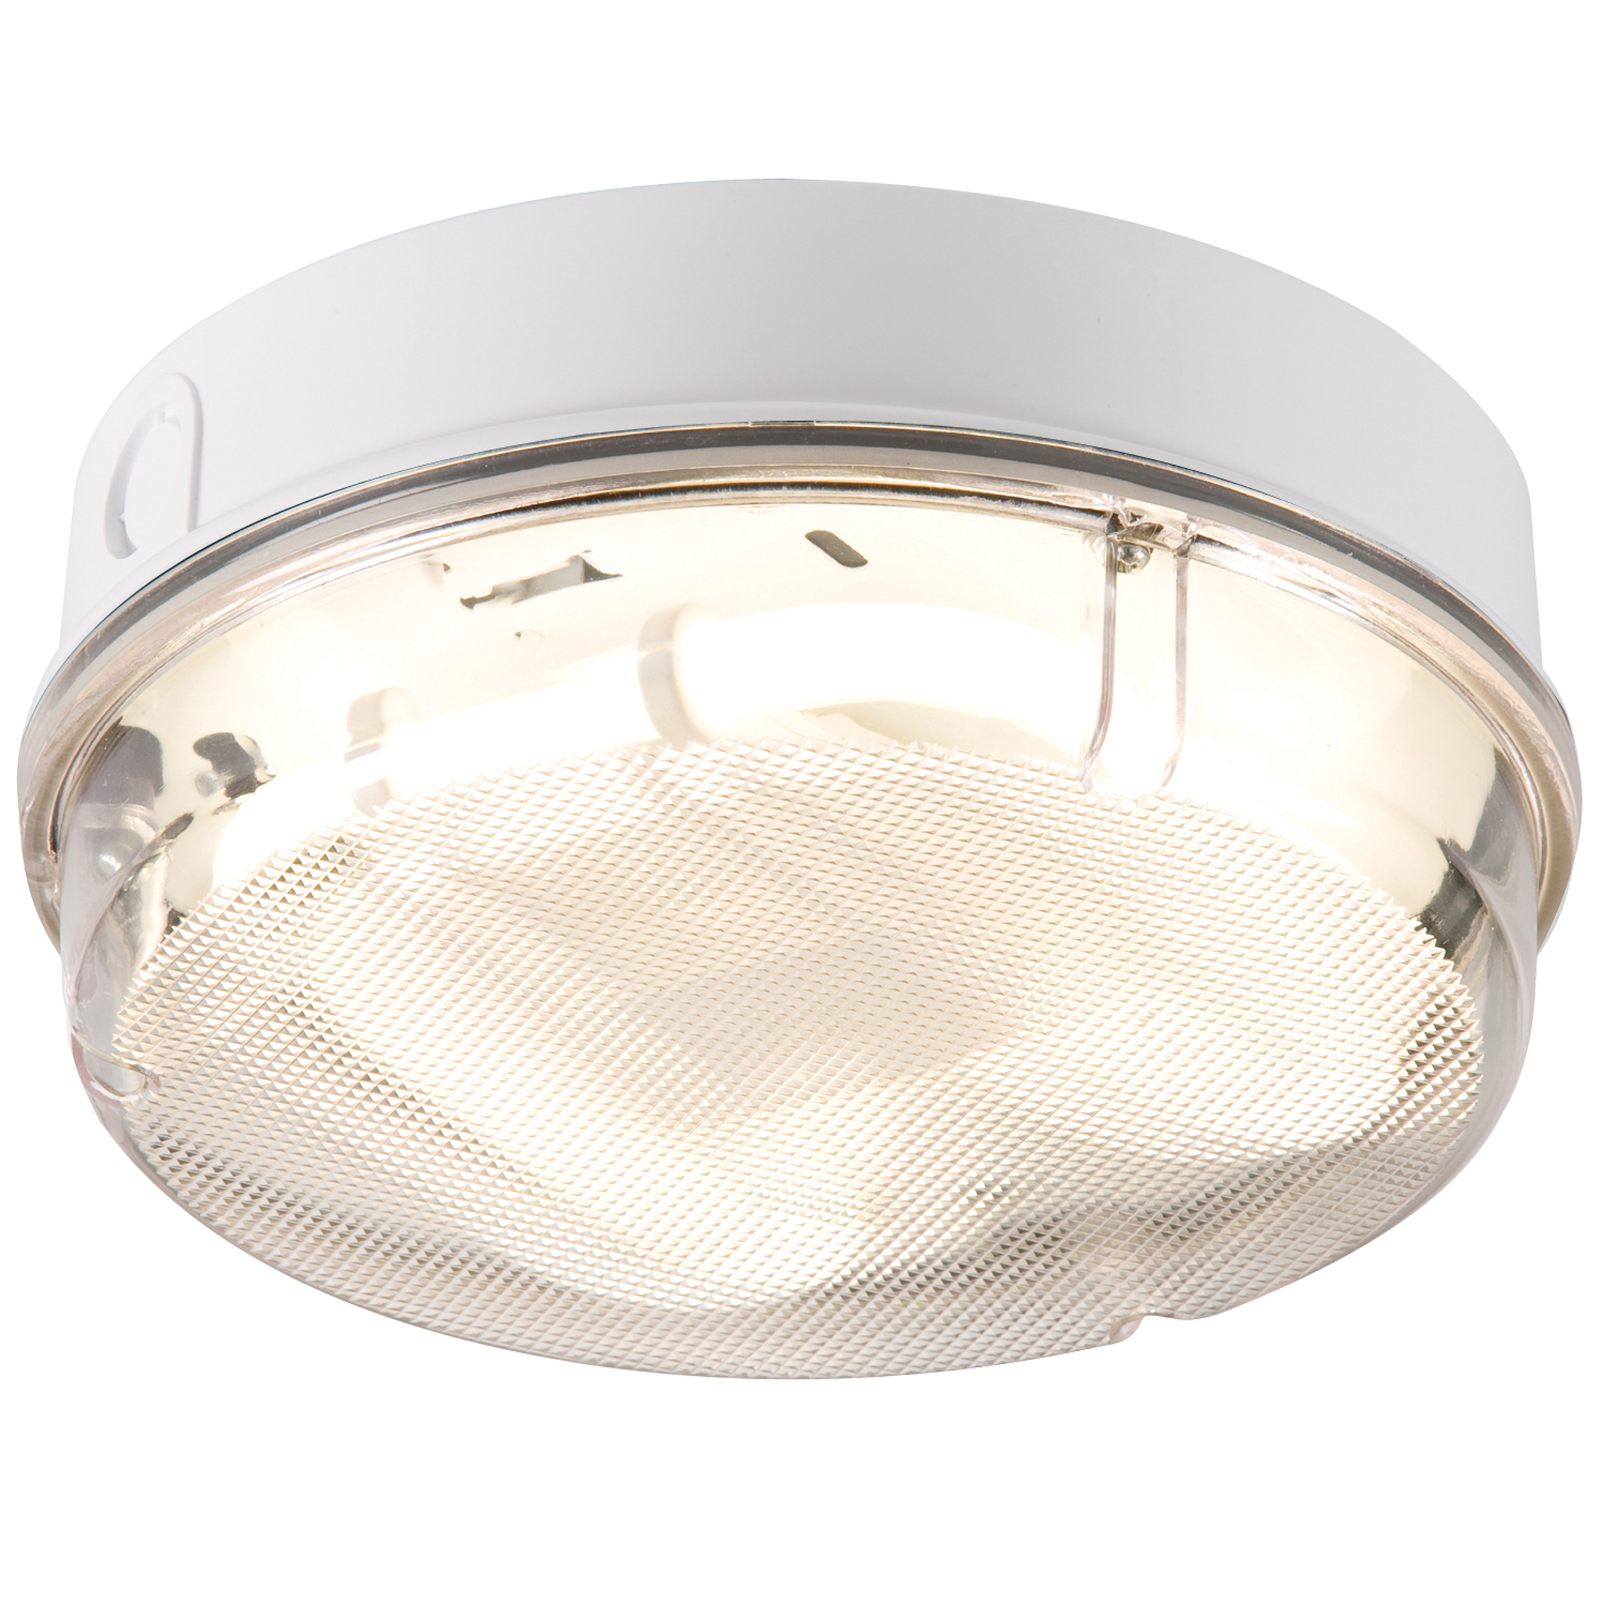 IP65 28W HF Round Emergency Bulkhead With Prismatic Diffuser And White Base - TPR28WPEMHF 